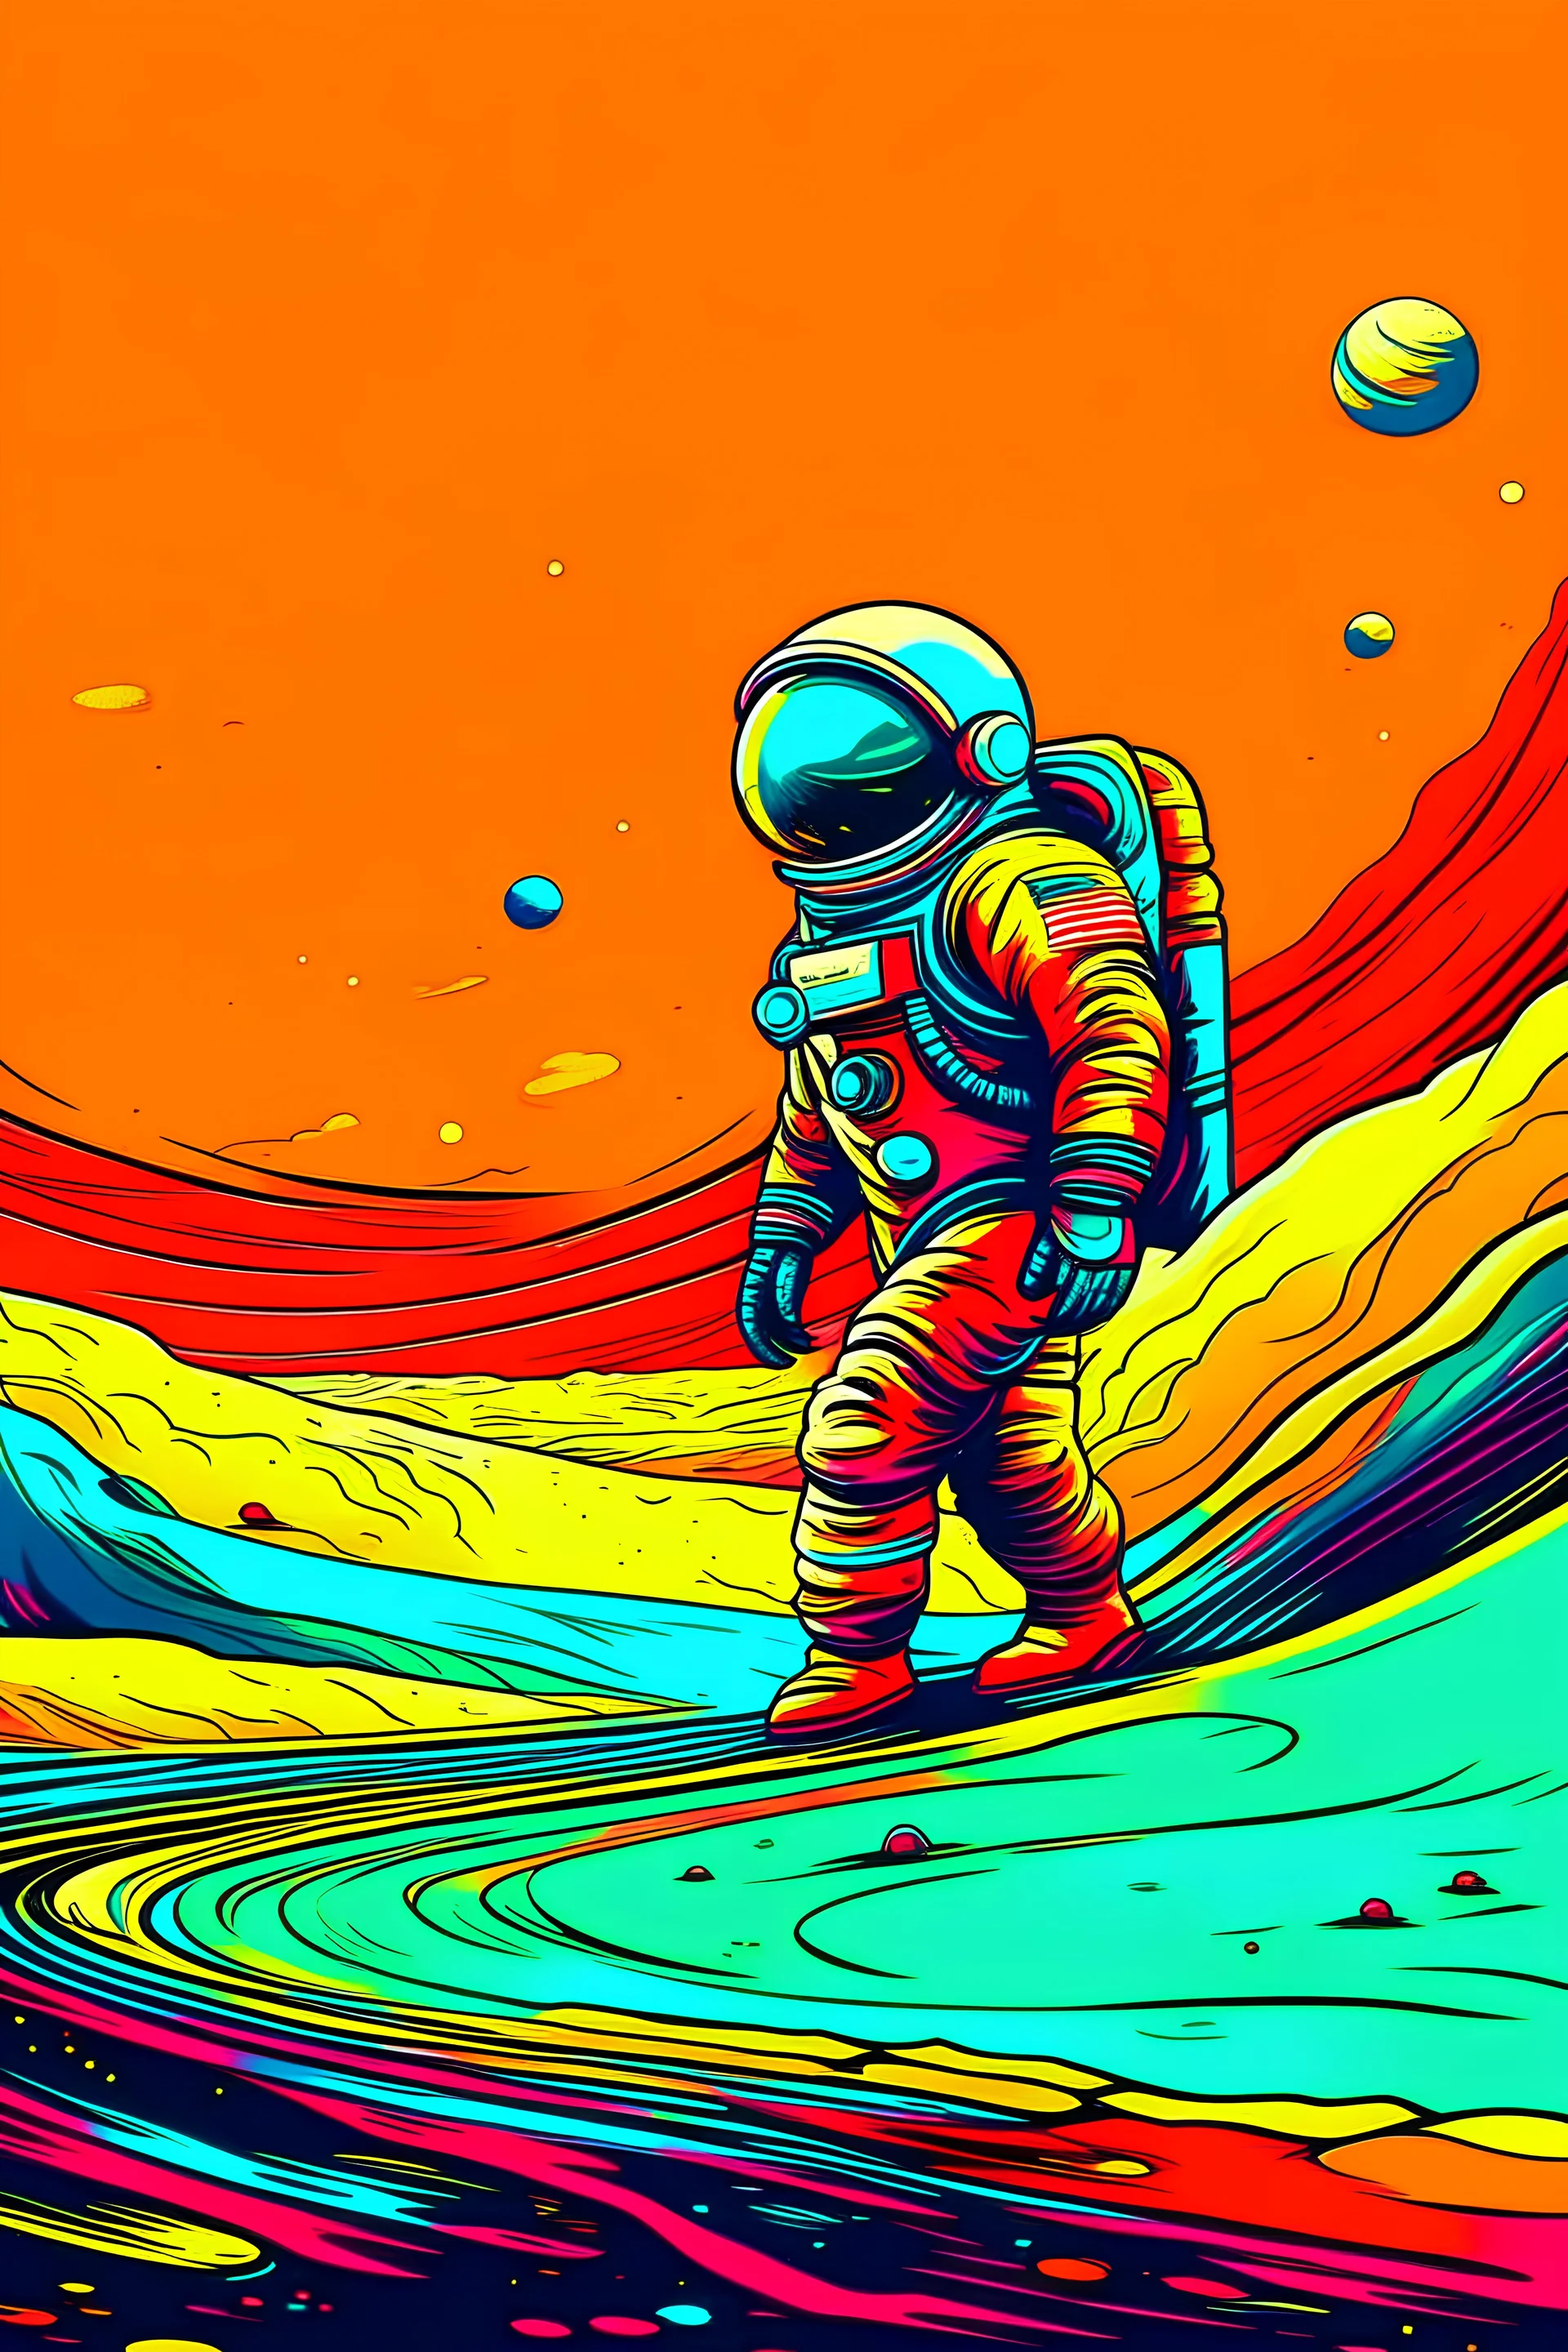 Cartoon of a spaceman in the vastness of apace, vivid colors